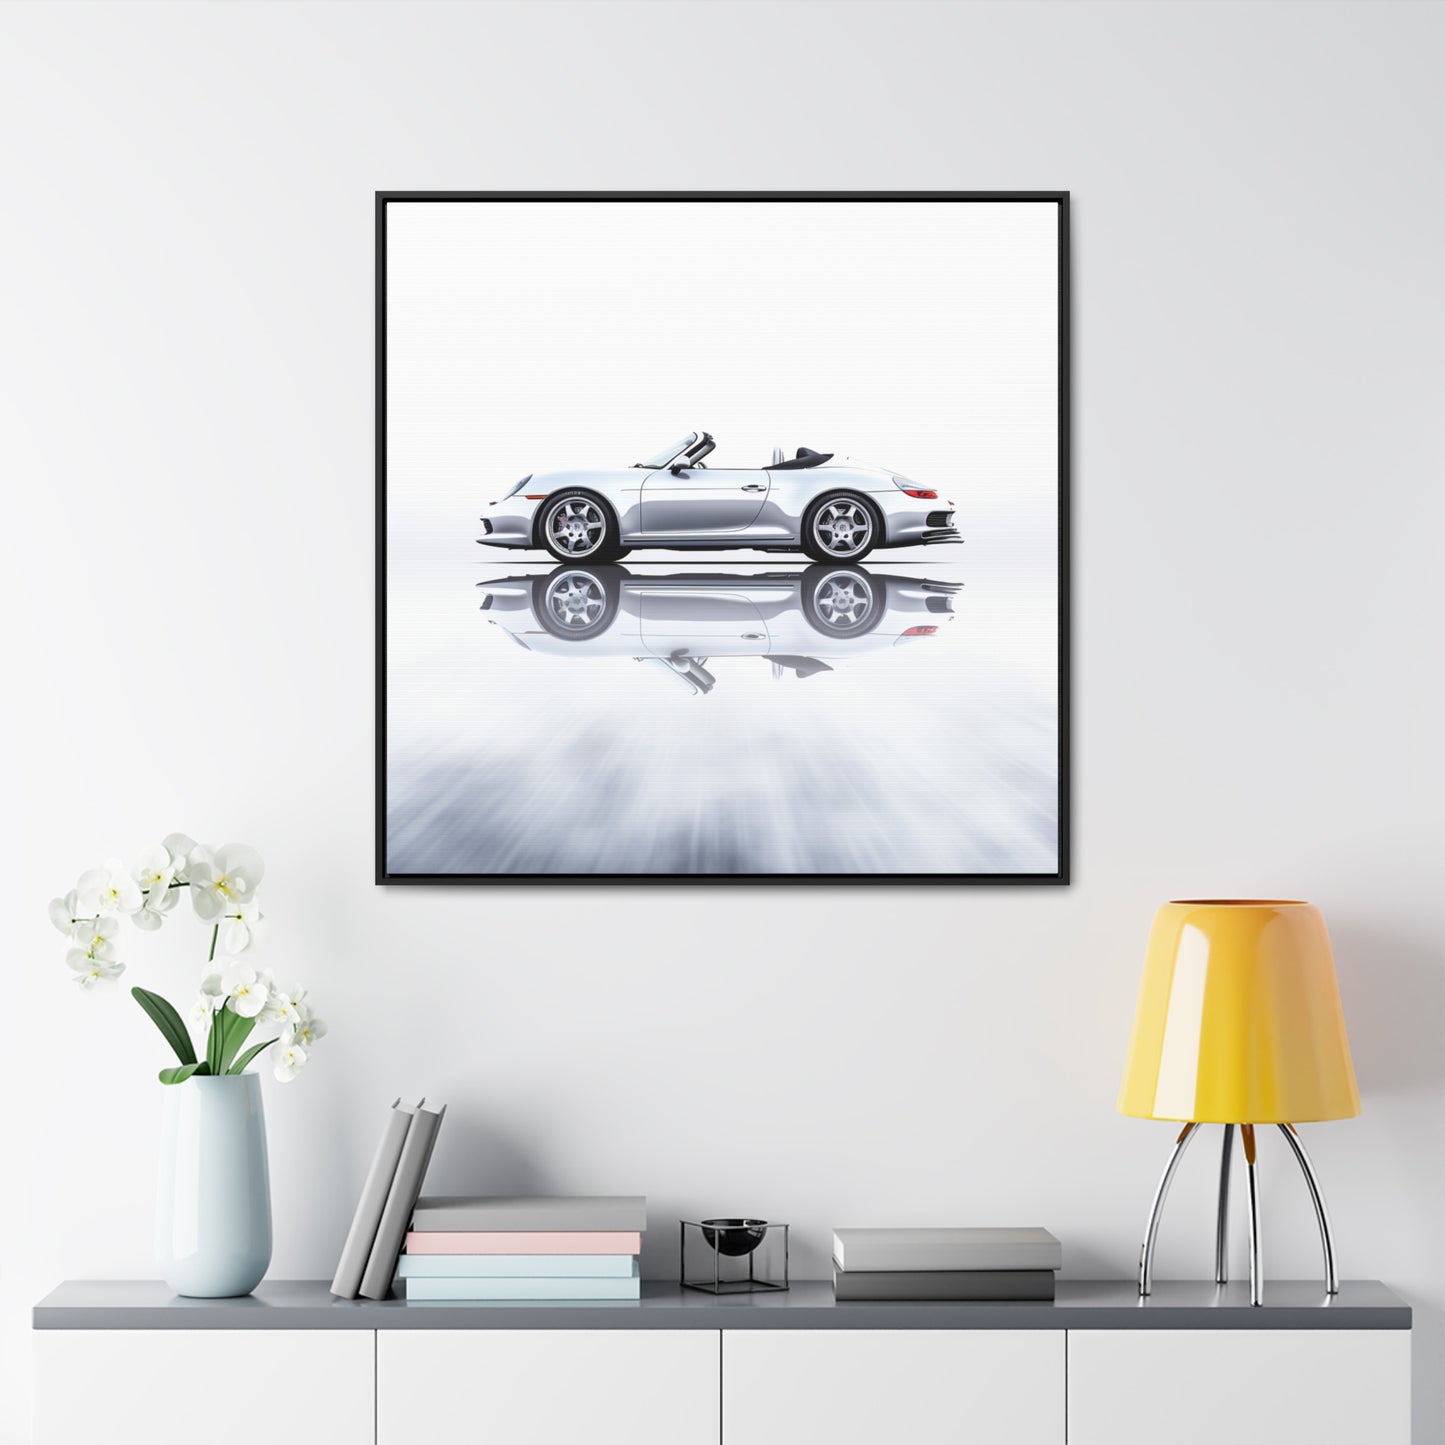 Gallery Canvas Wraps, Square Frame 911 Speedster on water 3